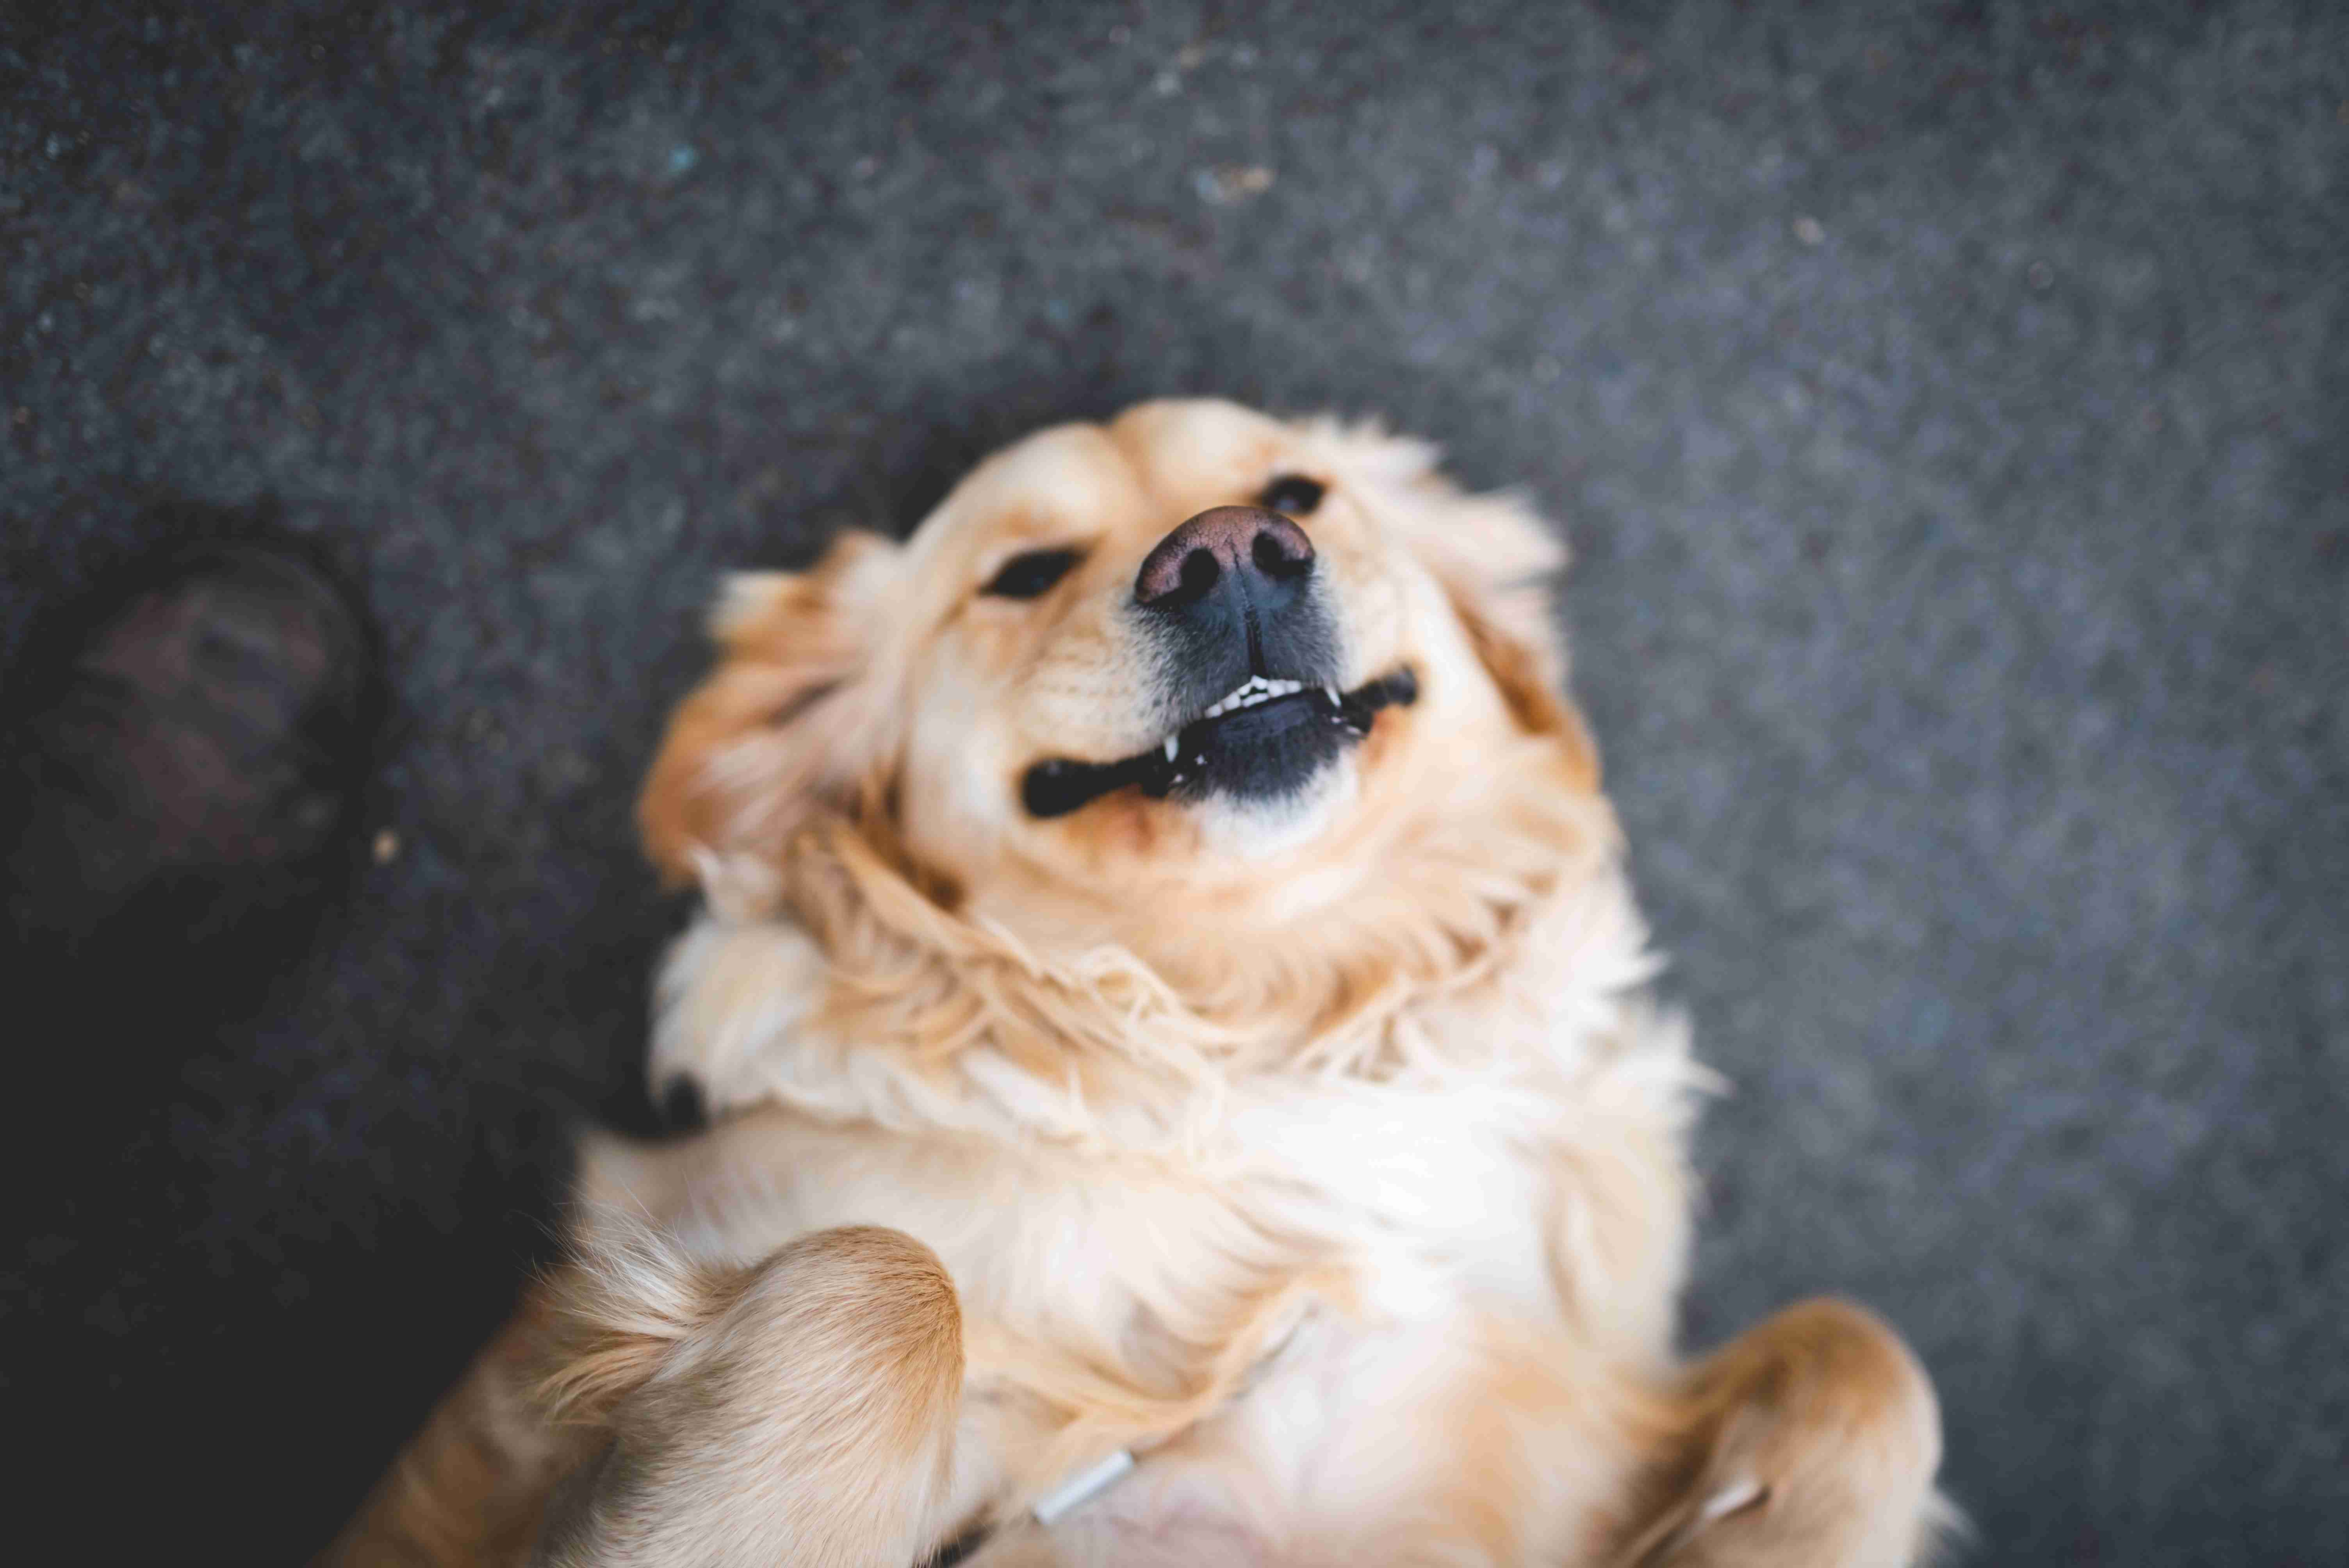 What are the common health issues that Golden Retrievers face?